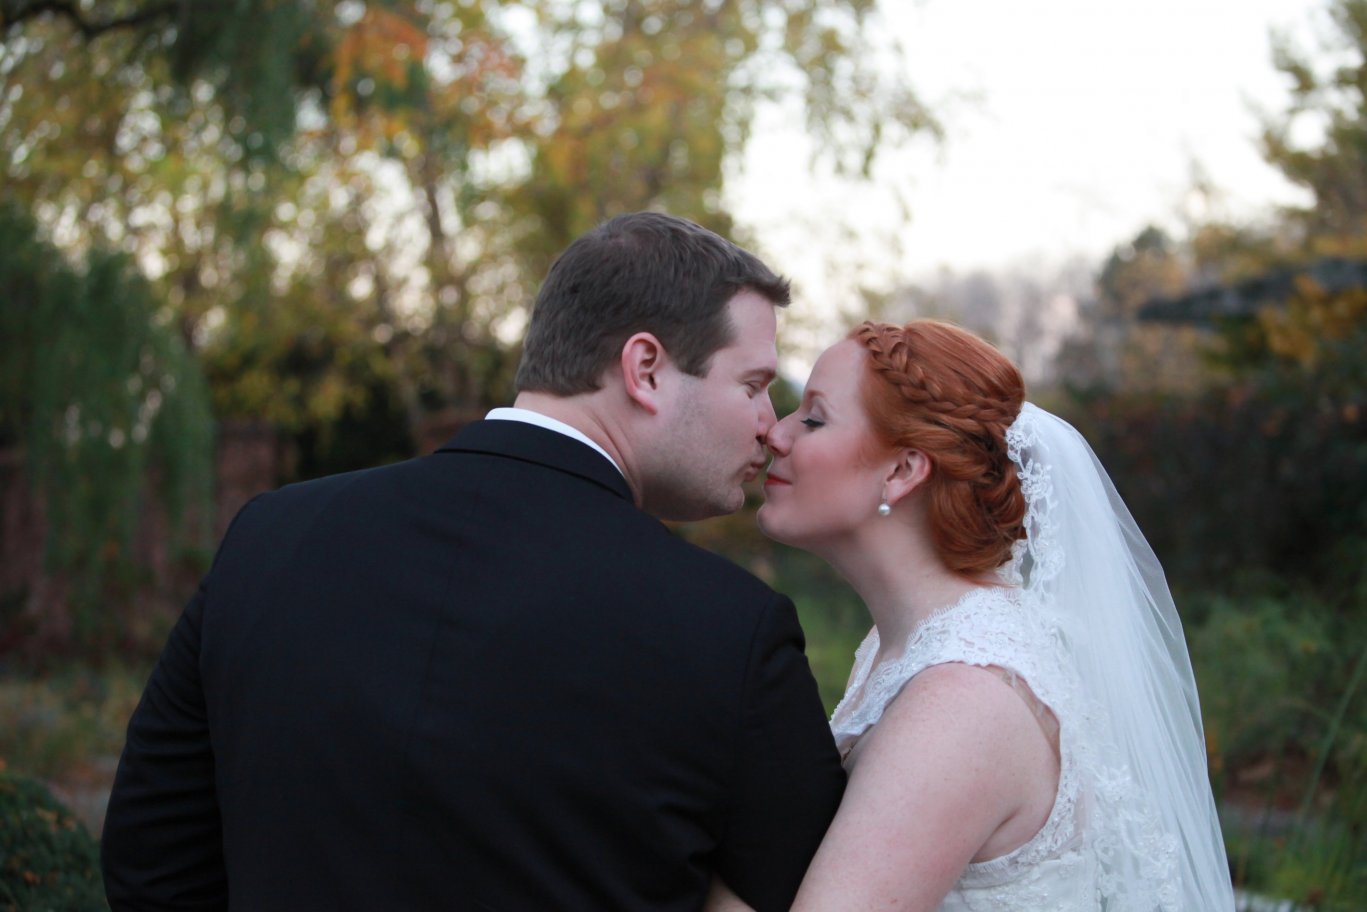 Beautiful Bride and Groom (Photography By: Jennifer Soots)